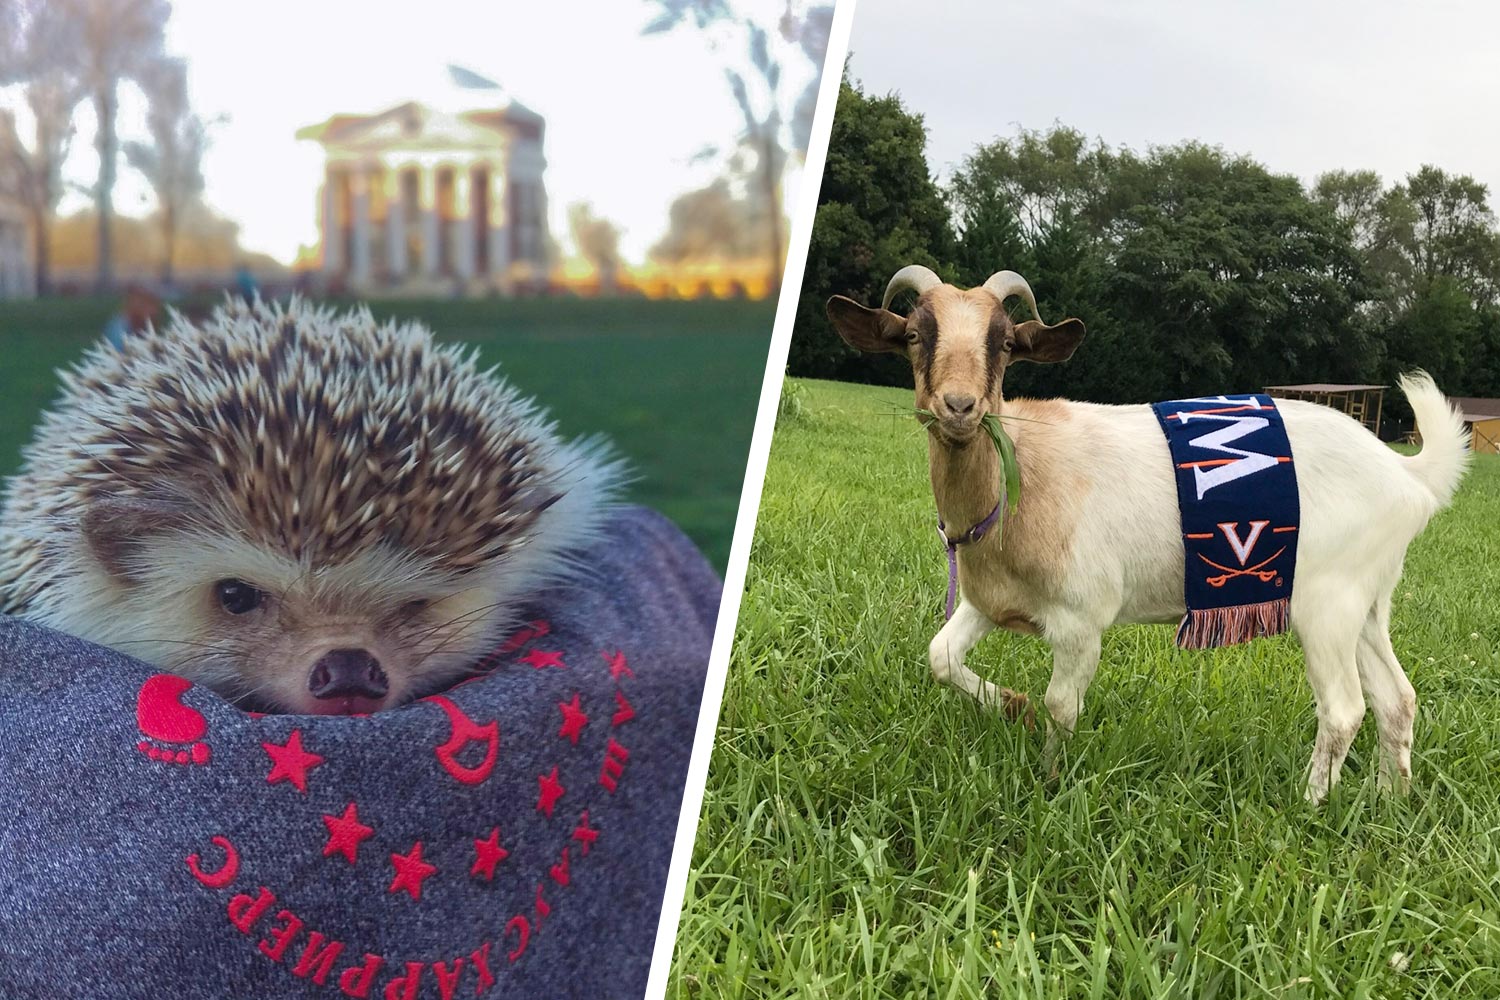 Left: Bill the hedgehog sits in front of the Rotunda Right: Opal the goat Stands in grass with a UVA scarf